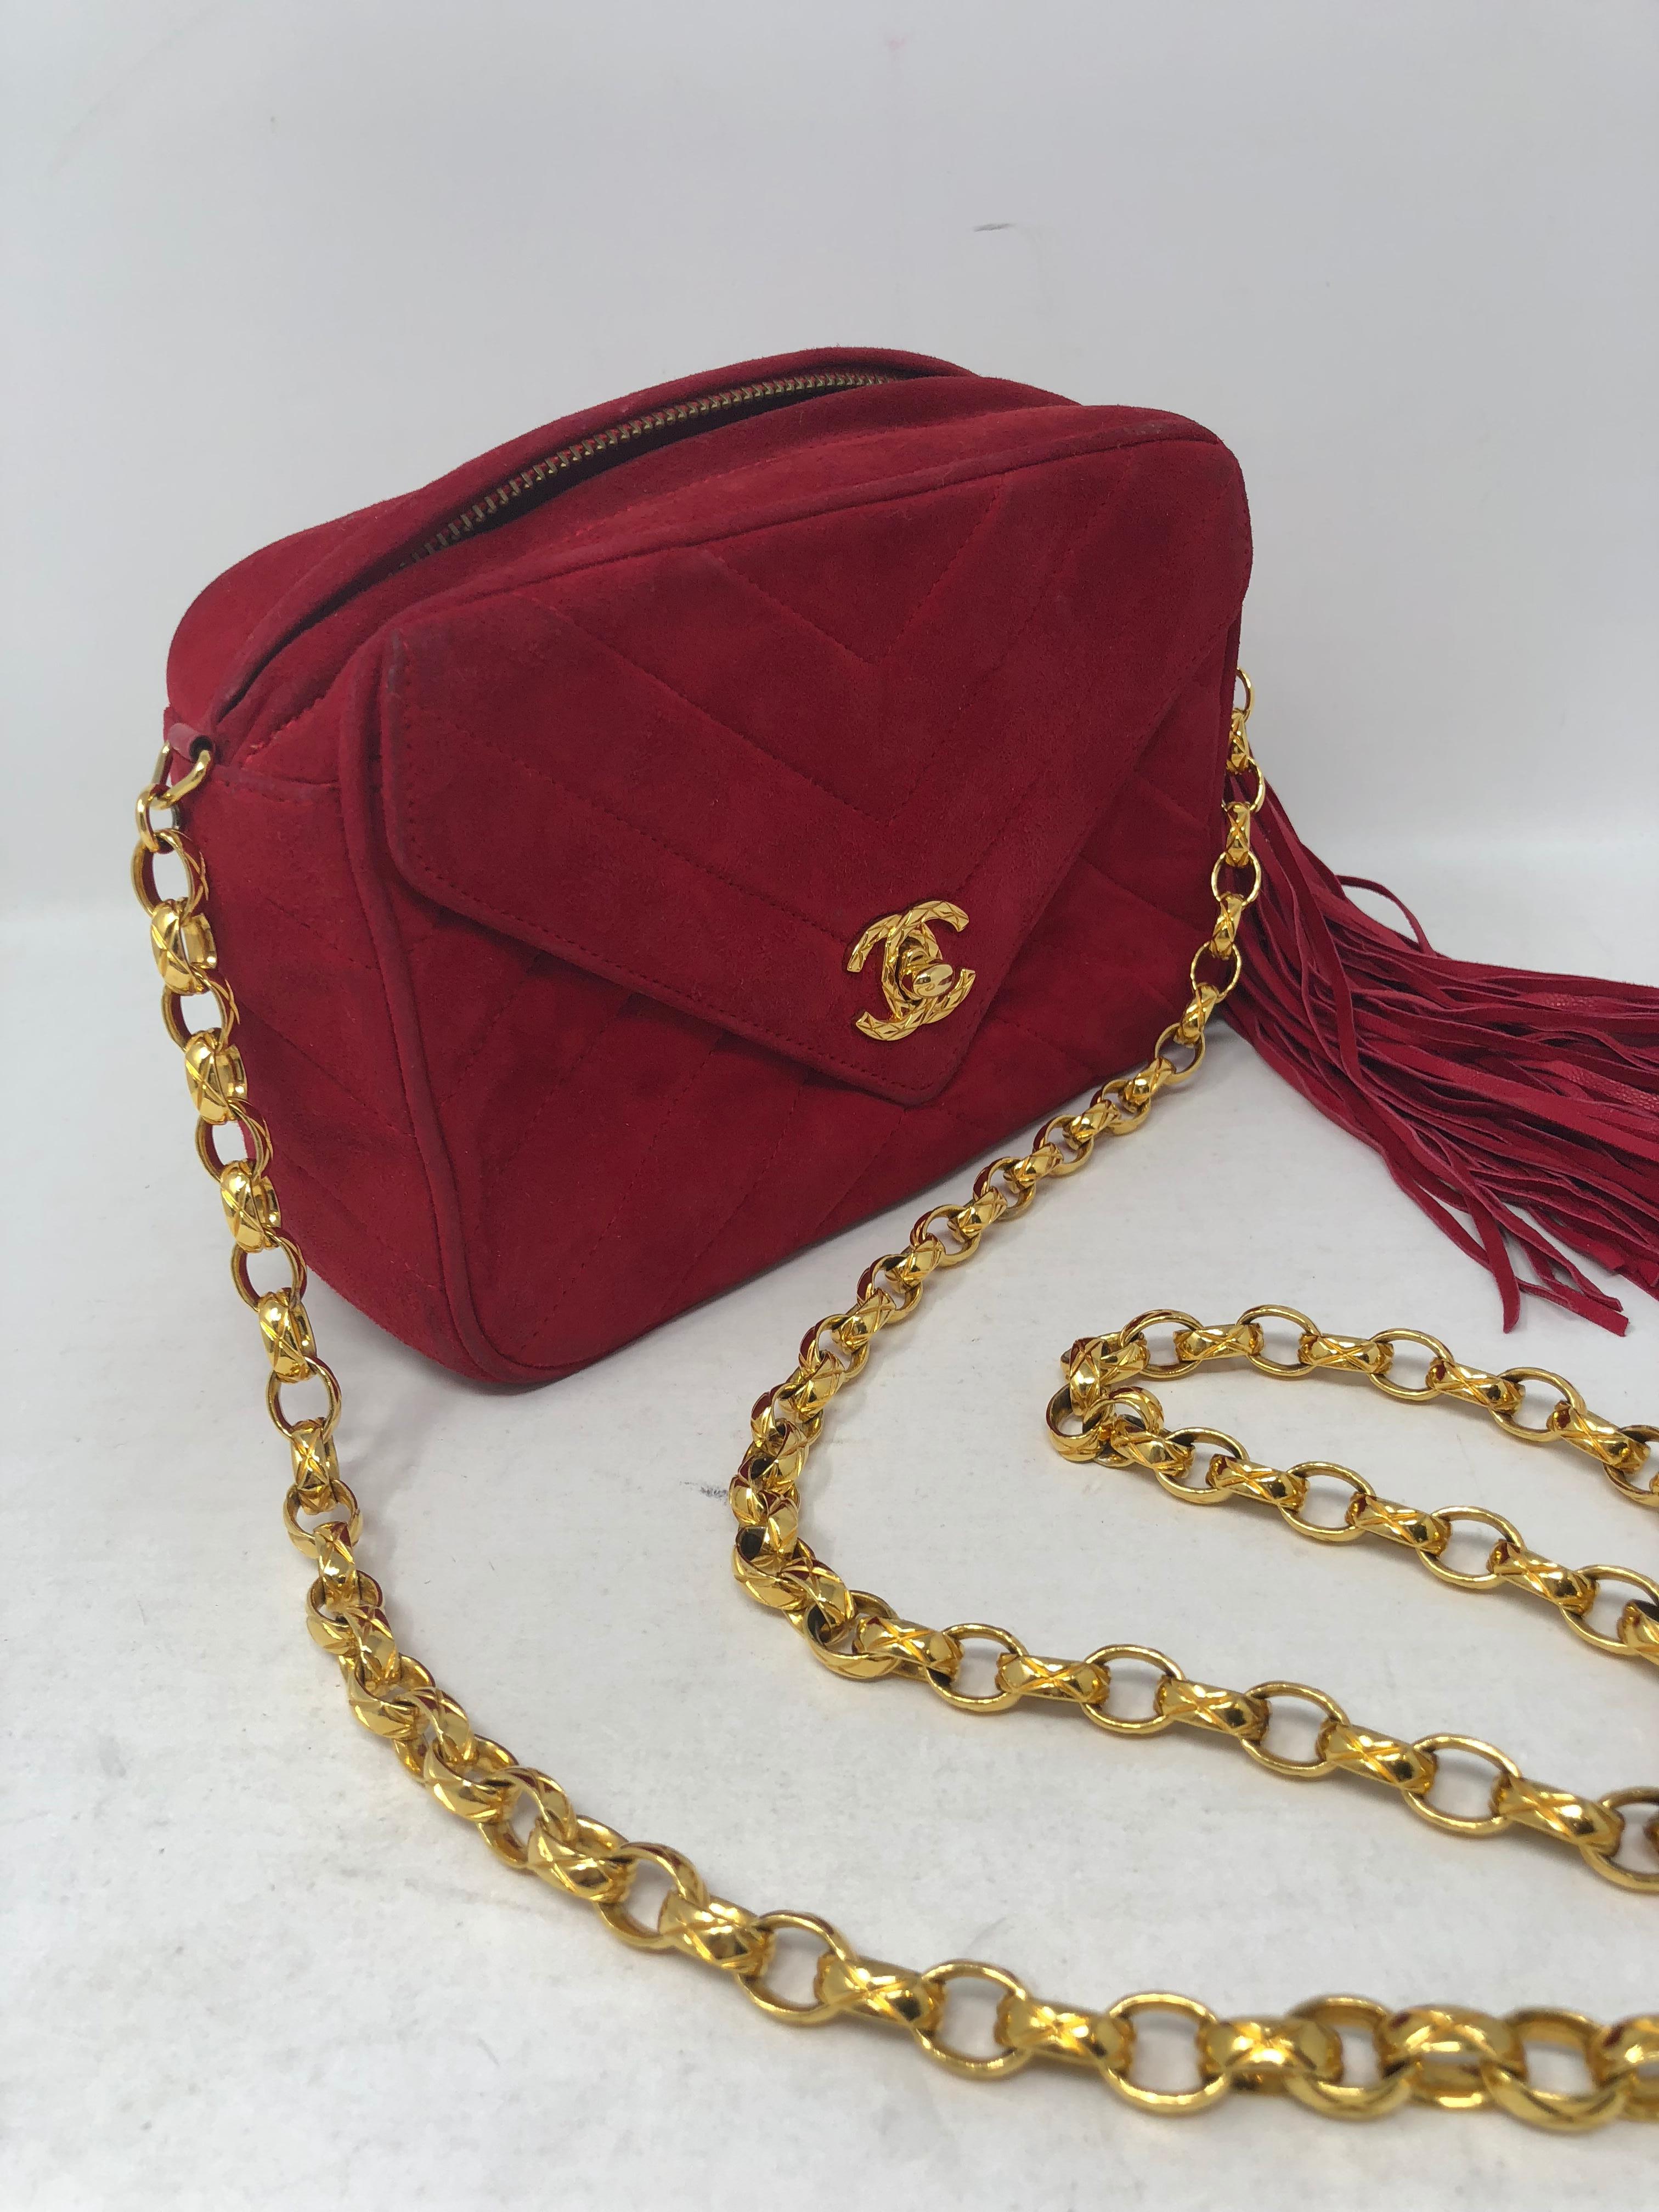 Brown Chanel Red Suede Bag with Fringe 